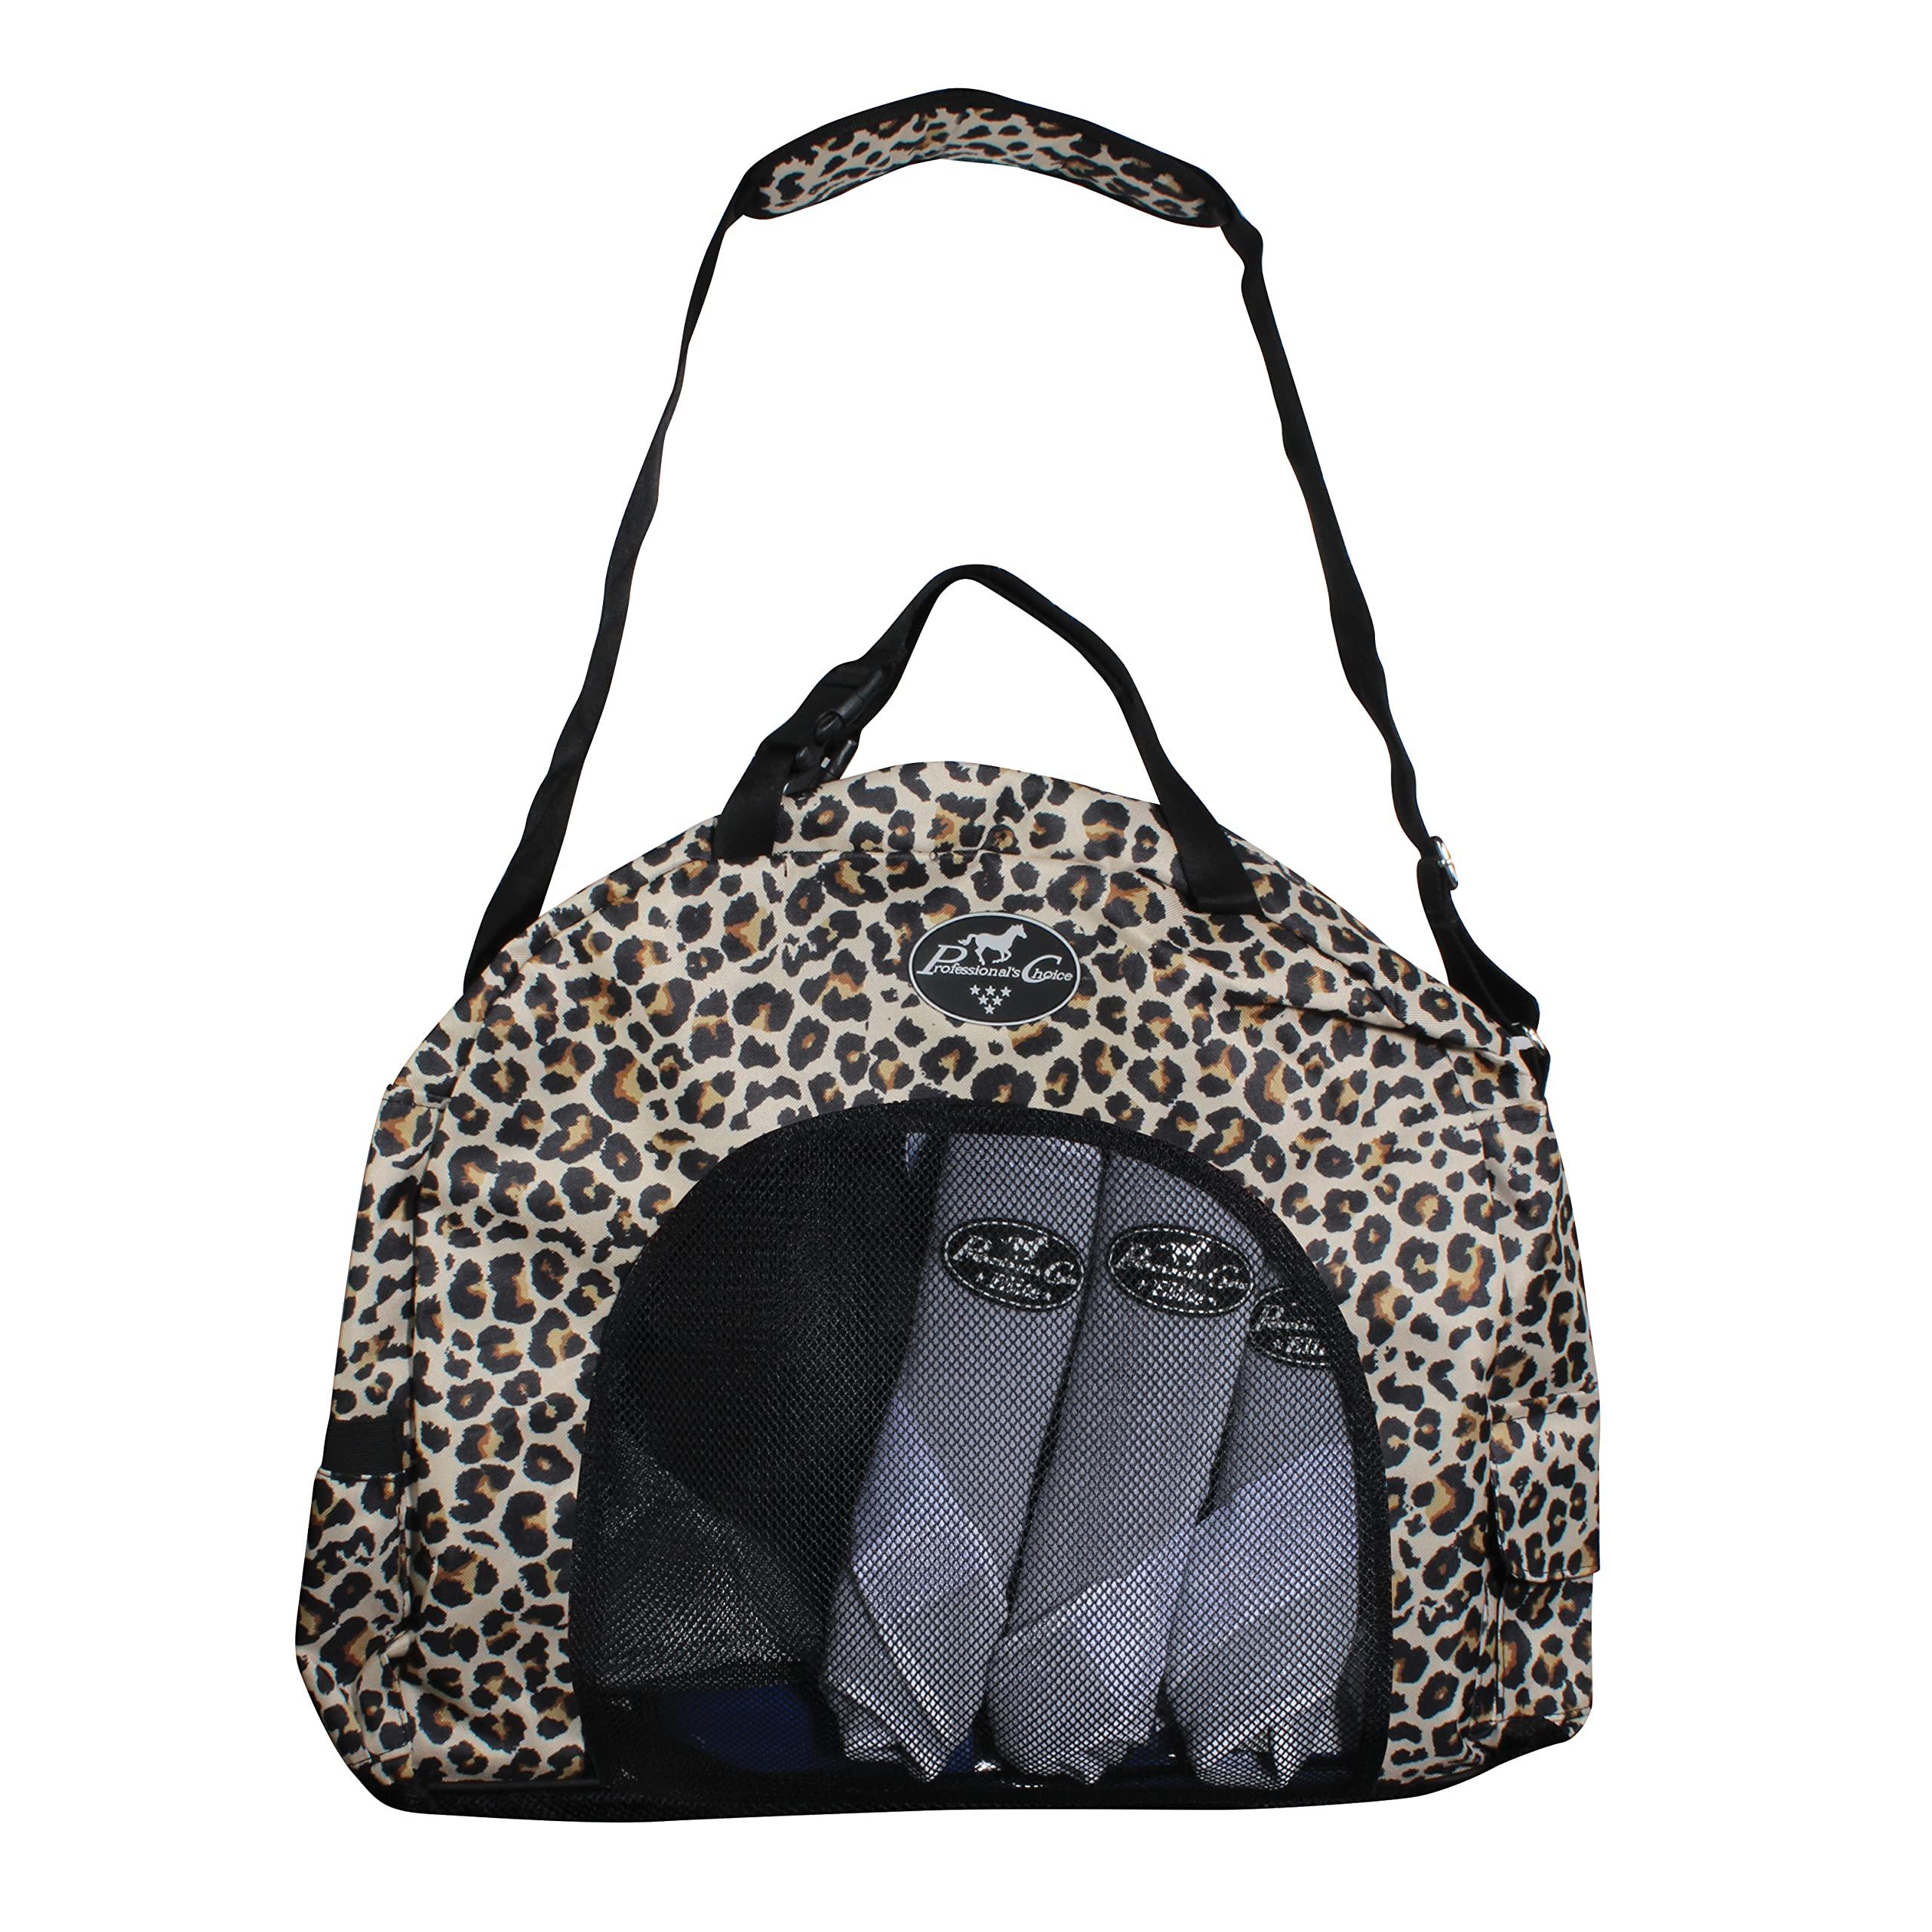 Coolhorse Professional\\\'s Choice Carry-All Bag (Cheetah)